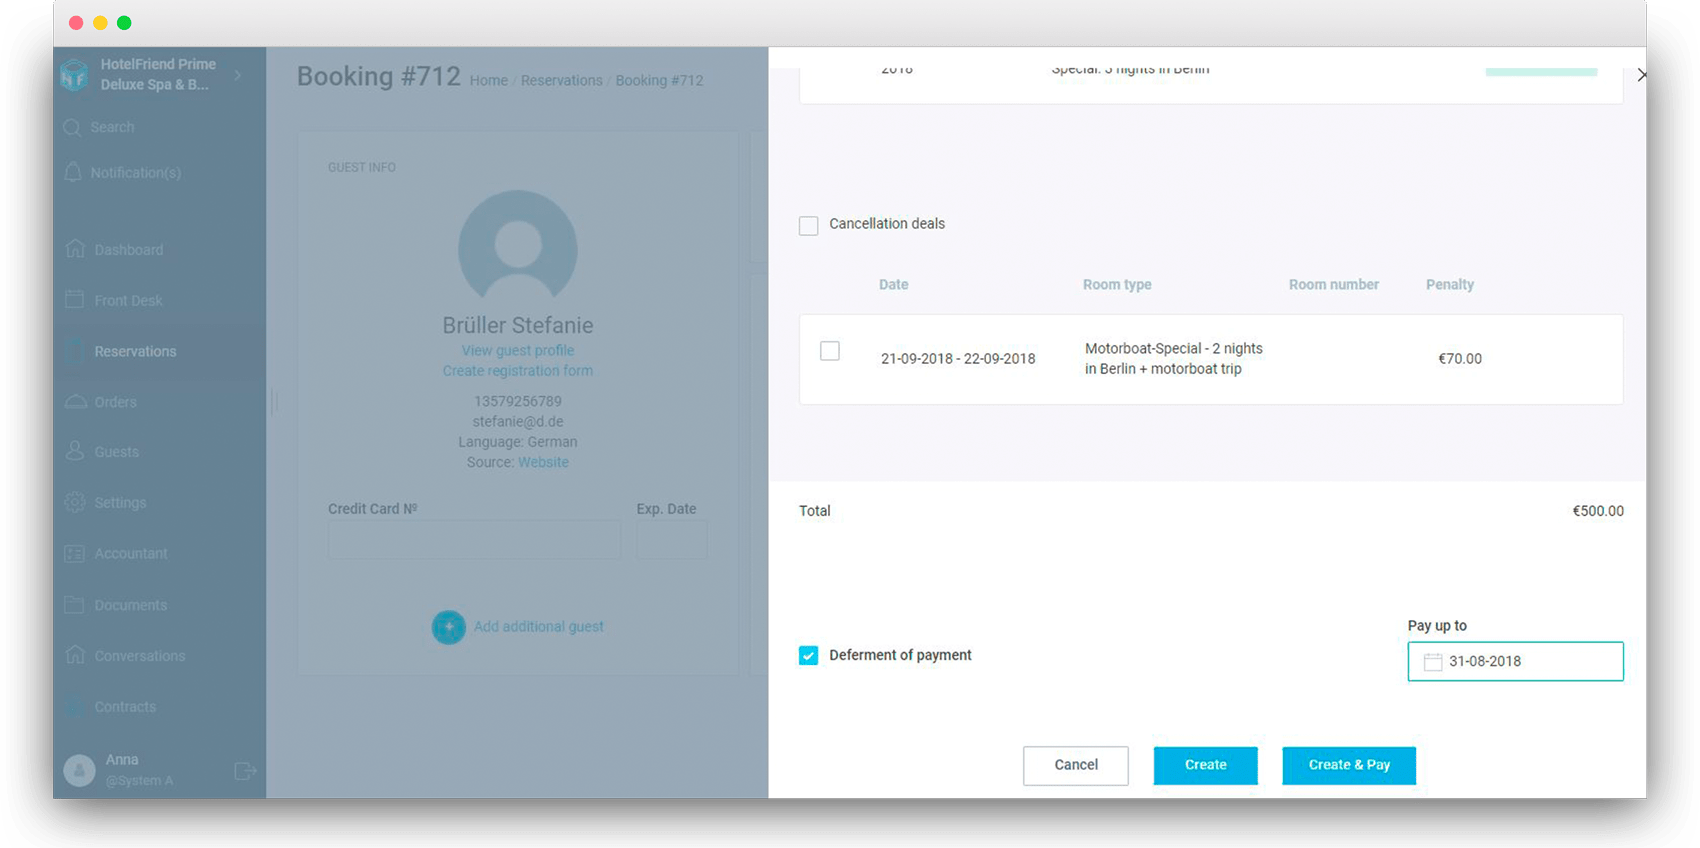 Enabled the option to defer the payment on invoice